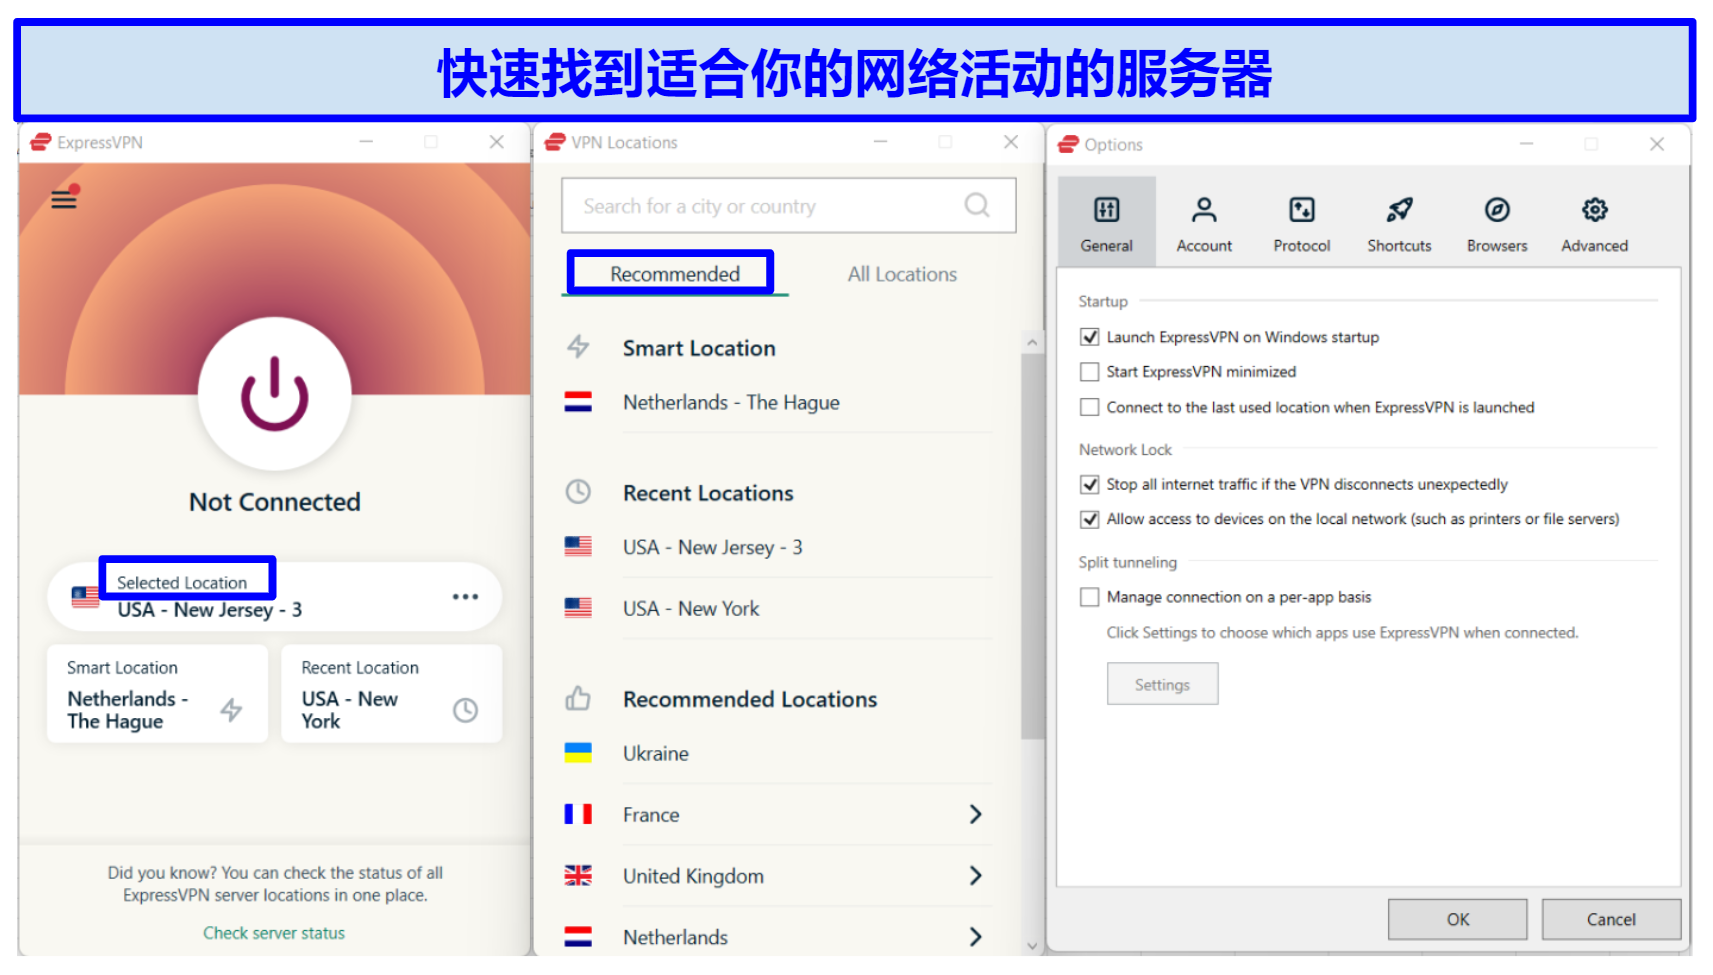 Screenshot of ExpressVPN's easy-to-use interface